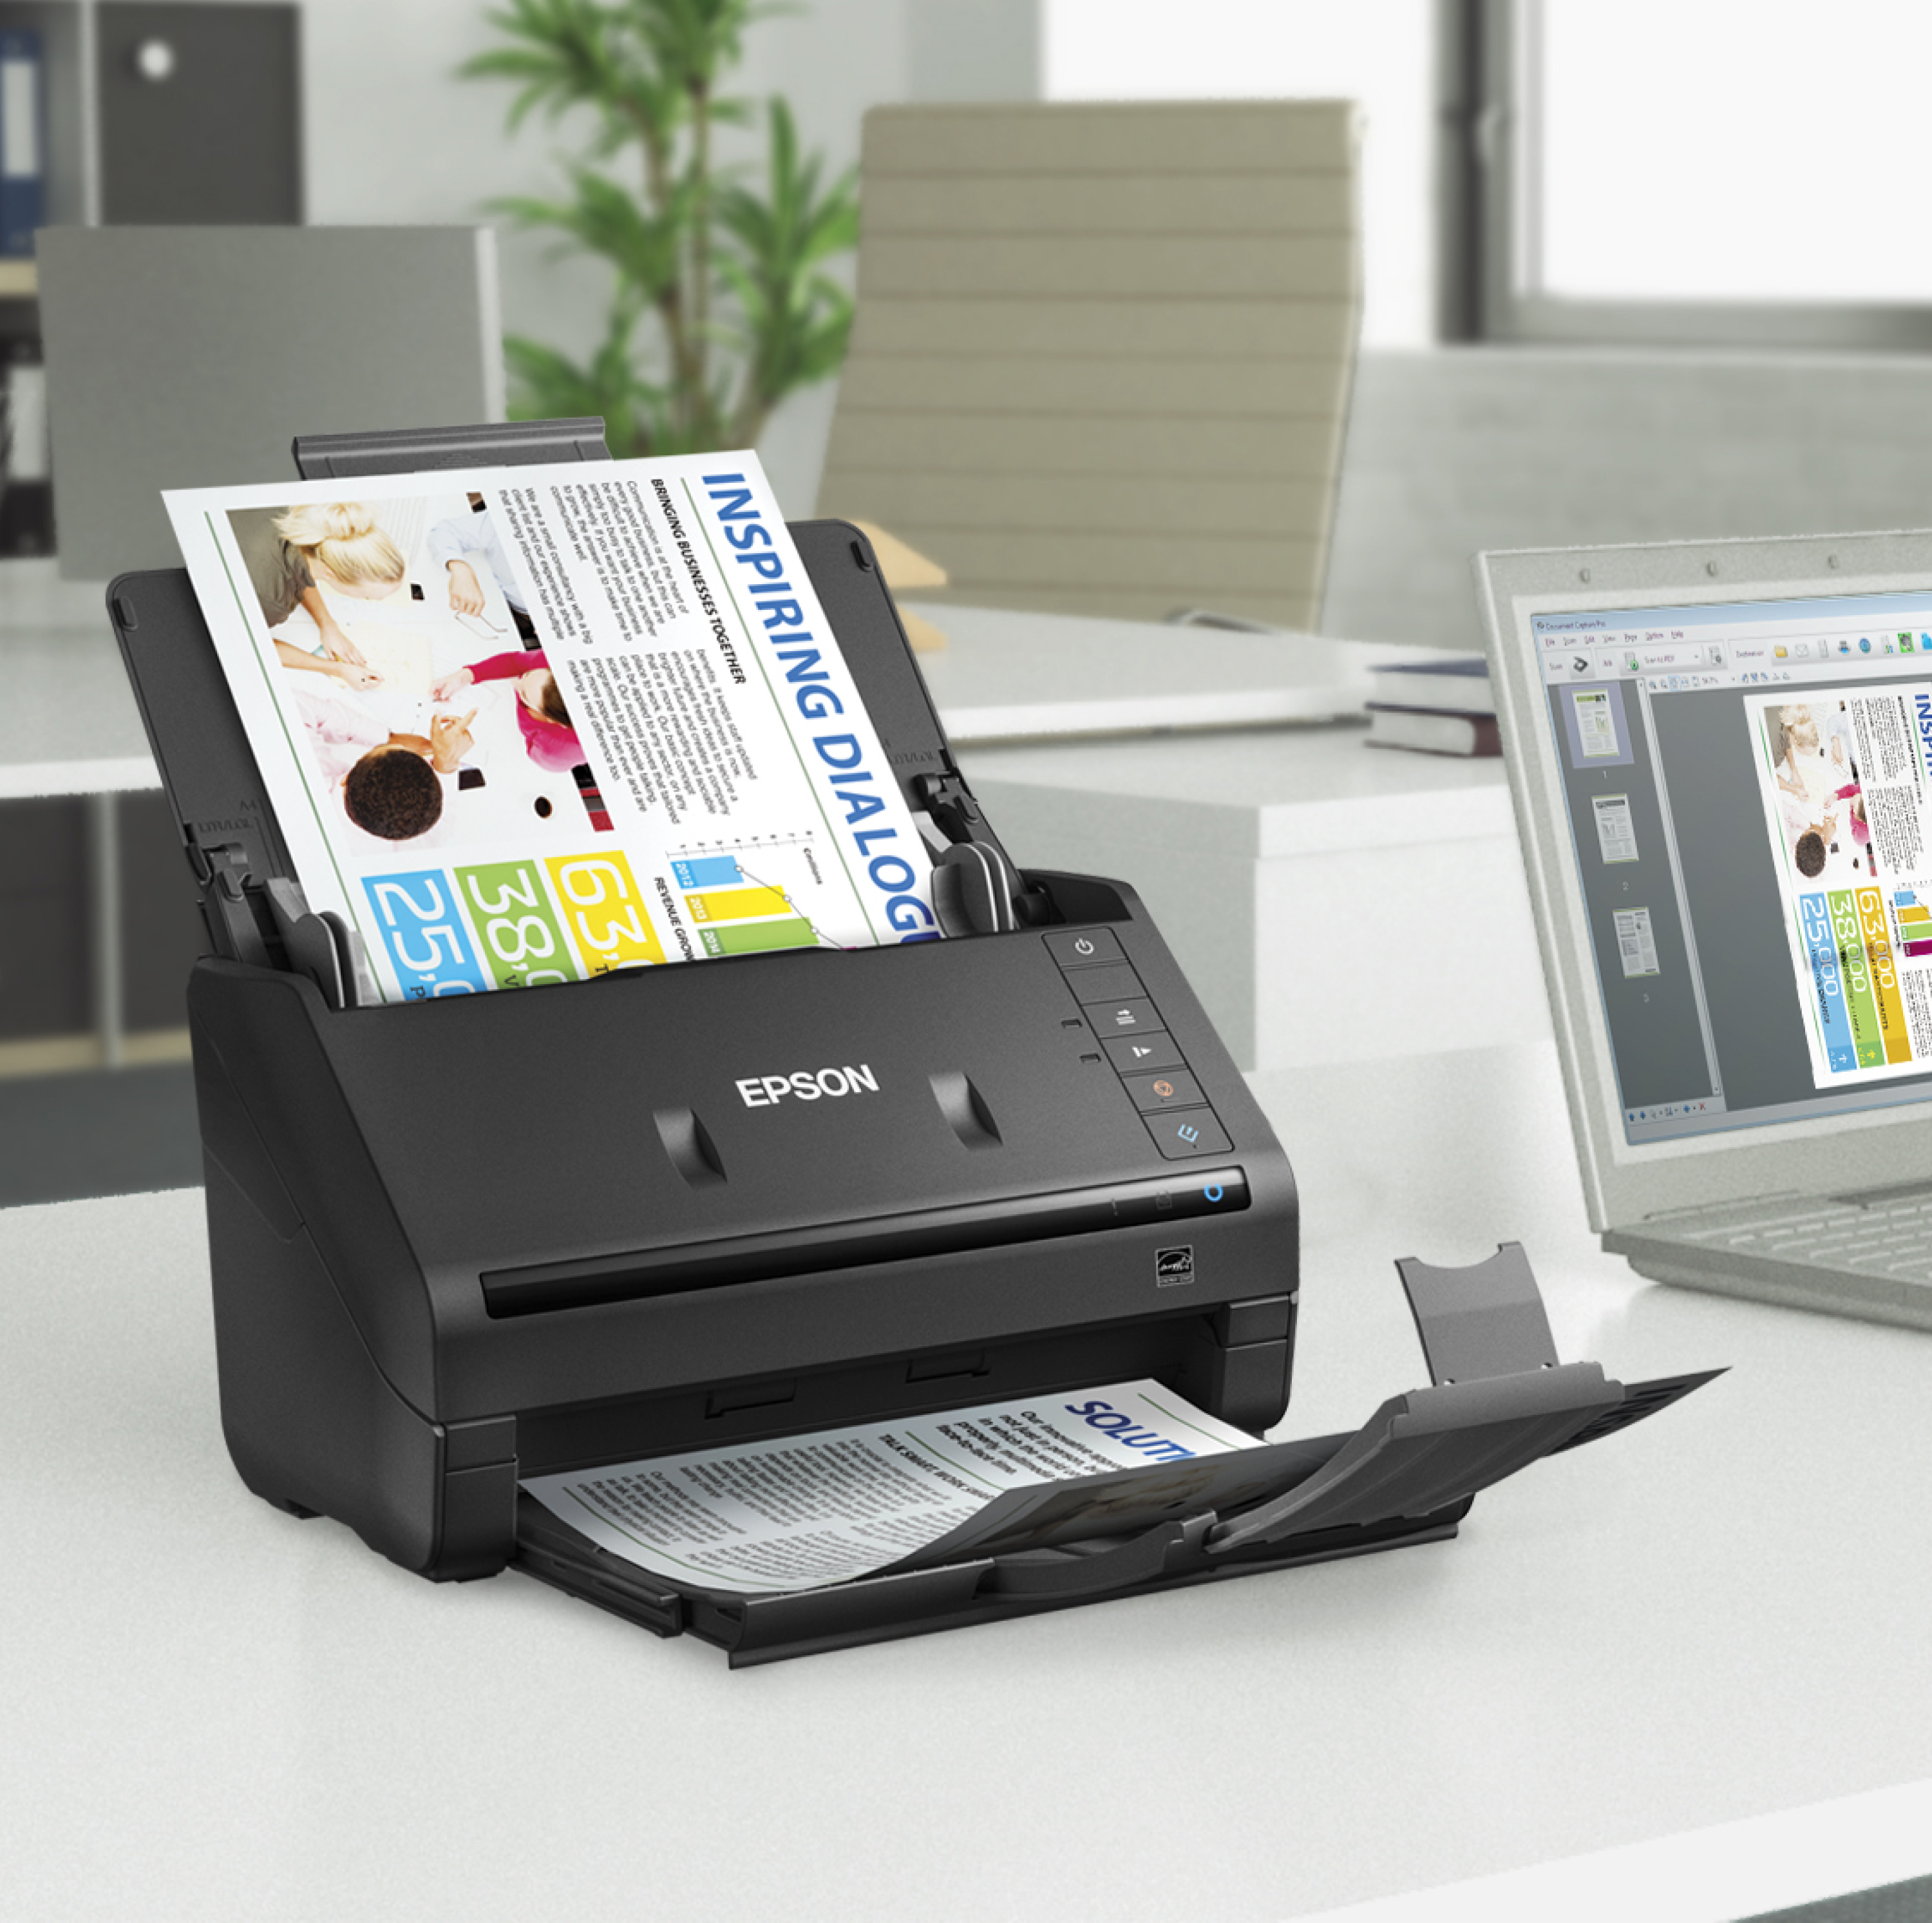 Epson WorkForce ES-400 Color Duplex Document Scanner for PC and Mac, Auto Document Feeder (ADF) - image 6 of 7